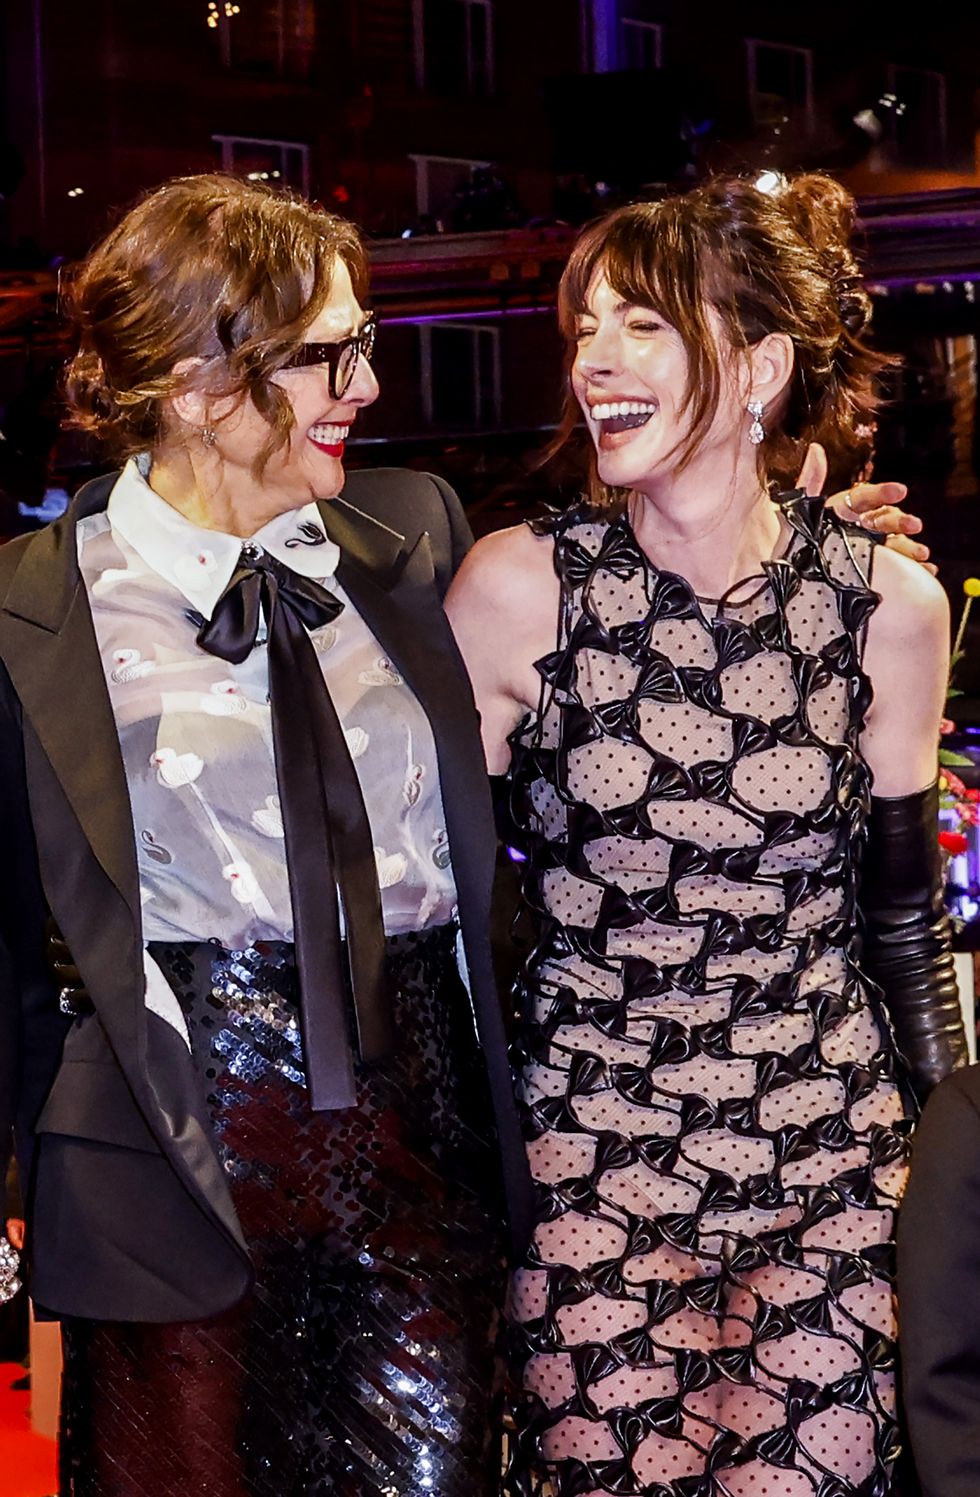 berlin, germany february 16 us director rebecca miller and us actress anne hathaway attend the she came to me premiere and opening ceremony red carpet during the 73rd berlinale international film festival berlin at berlinale palast on february 16, 2023 in berlin, germany photo by isa foltingetty images